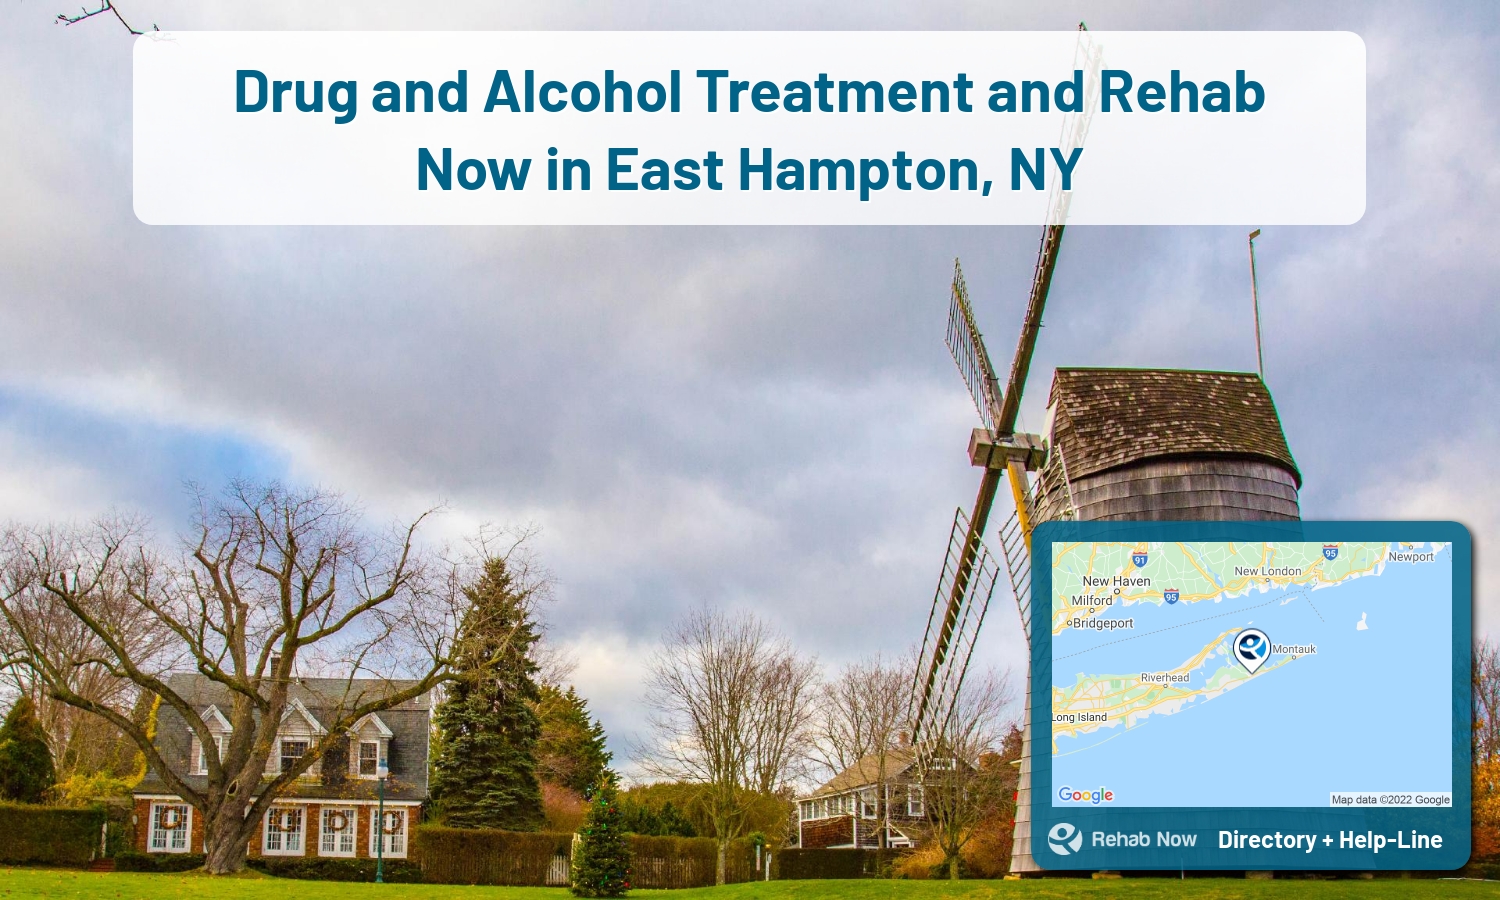 Drug rehab and alcohol treatment services nearby East Hampton, NY. Need help choosing a treatment program? Call our free hotline!